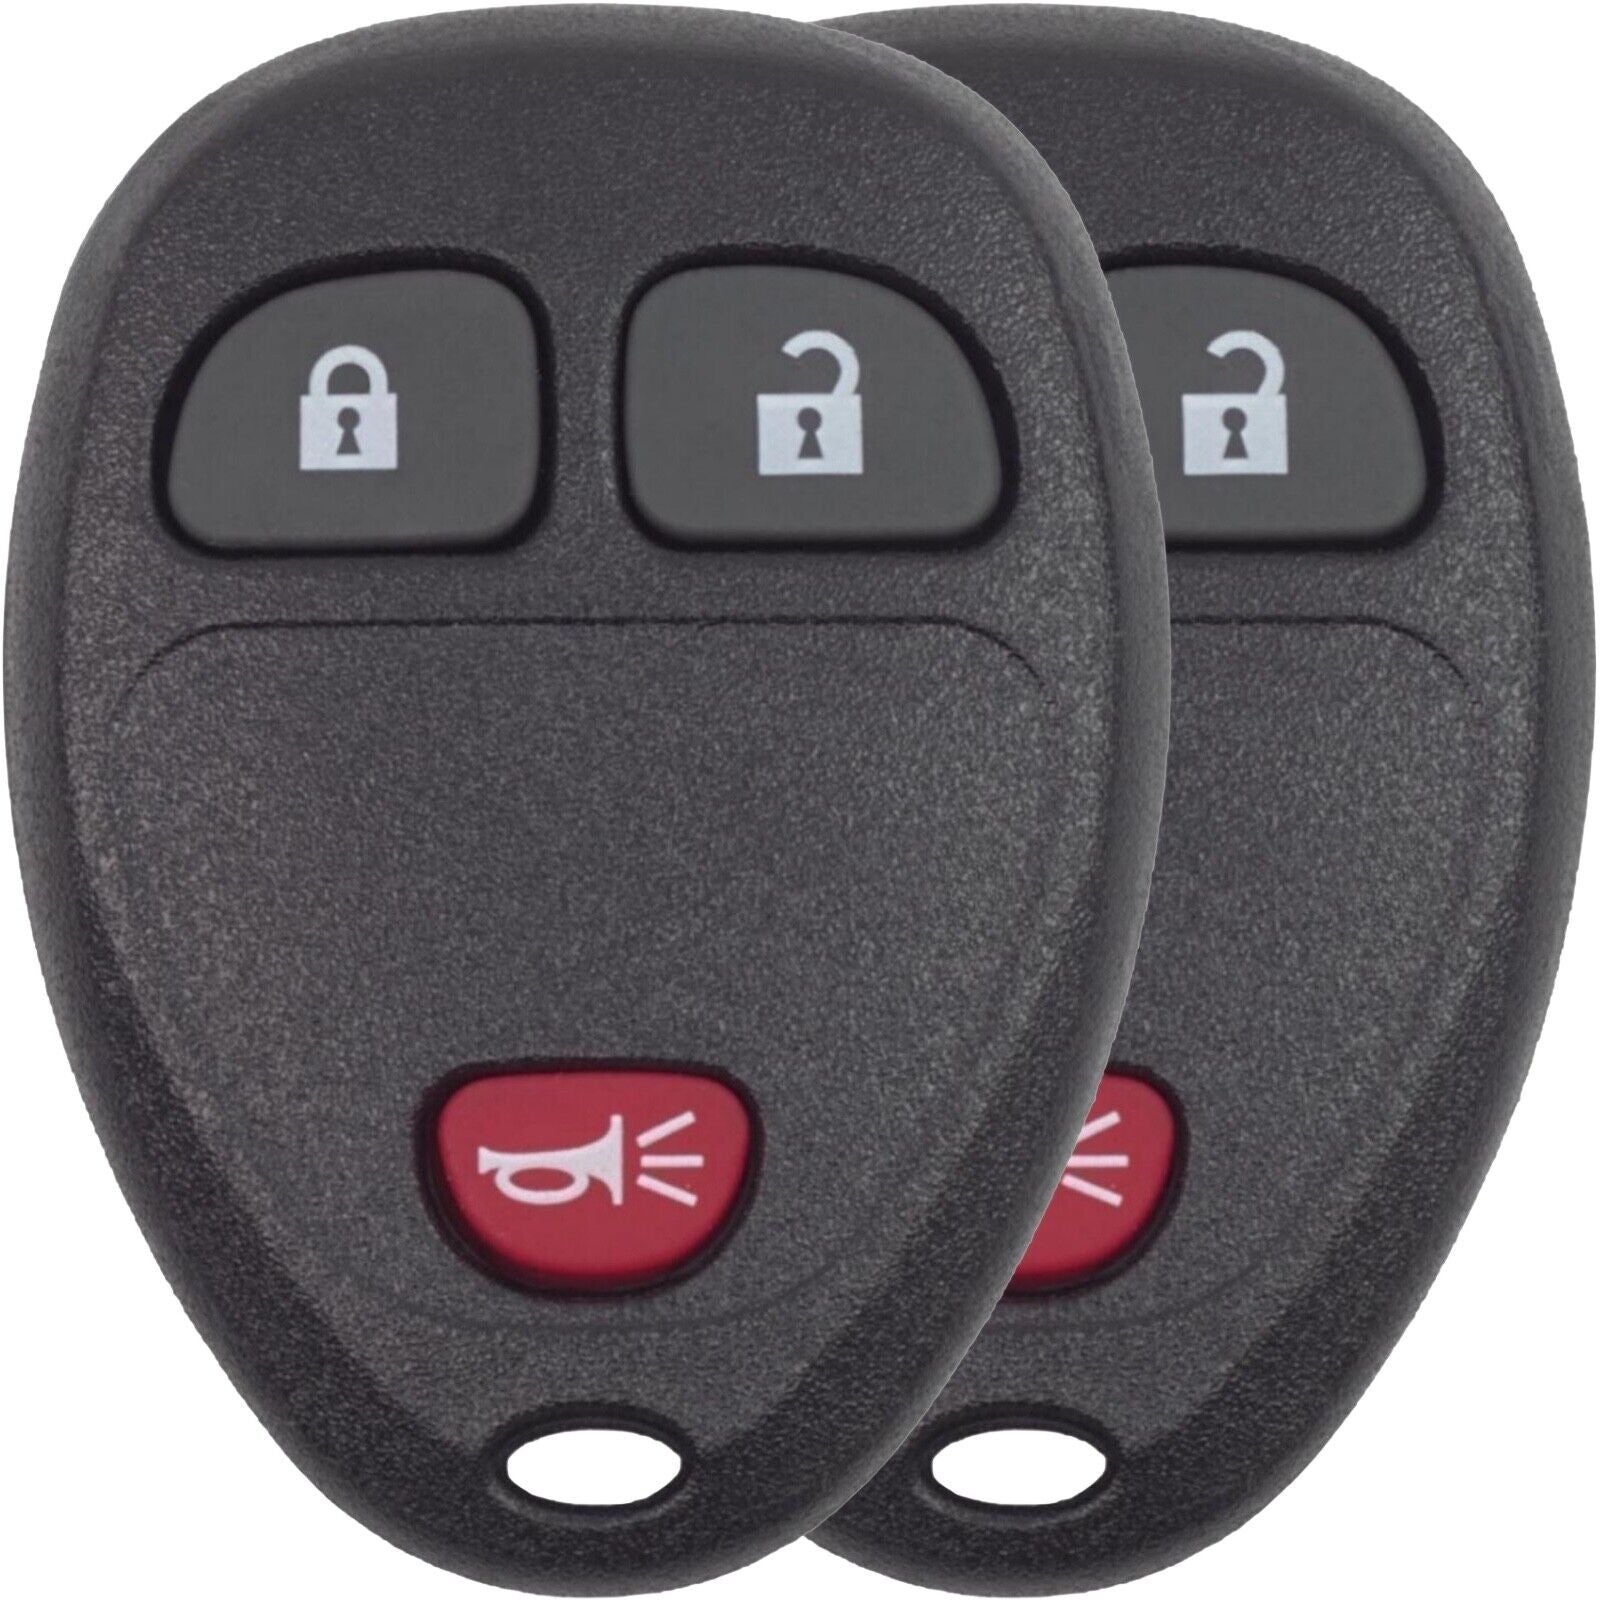 Key Fob Replacement For 2005-2007 Buick Terraza FCC ID: KOBGT04A